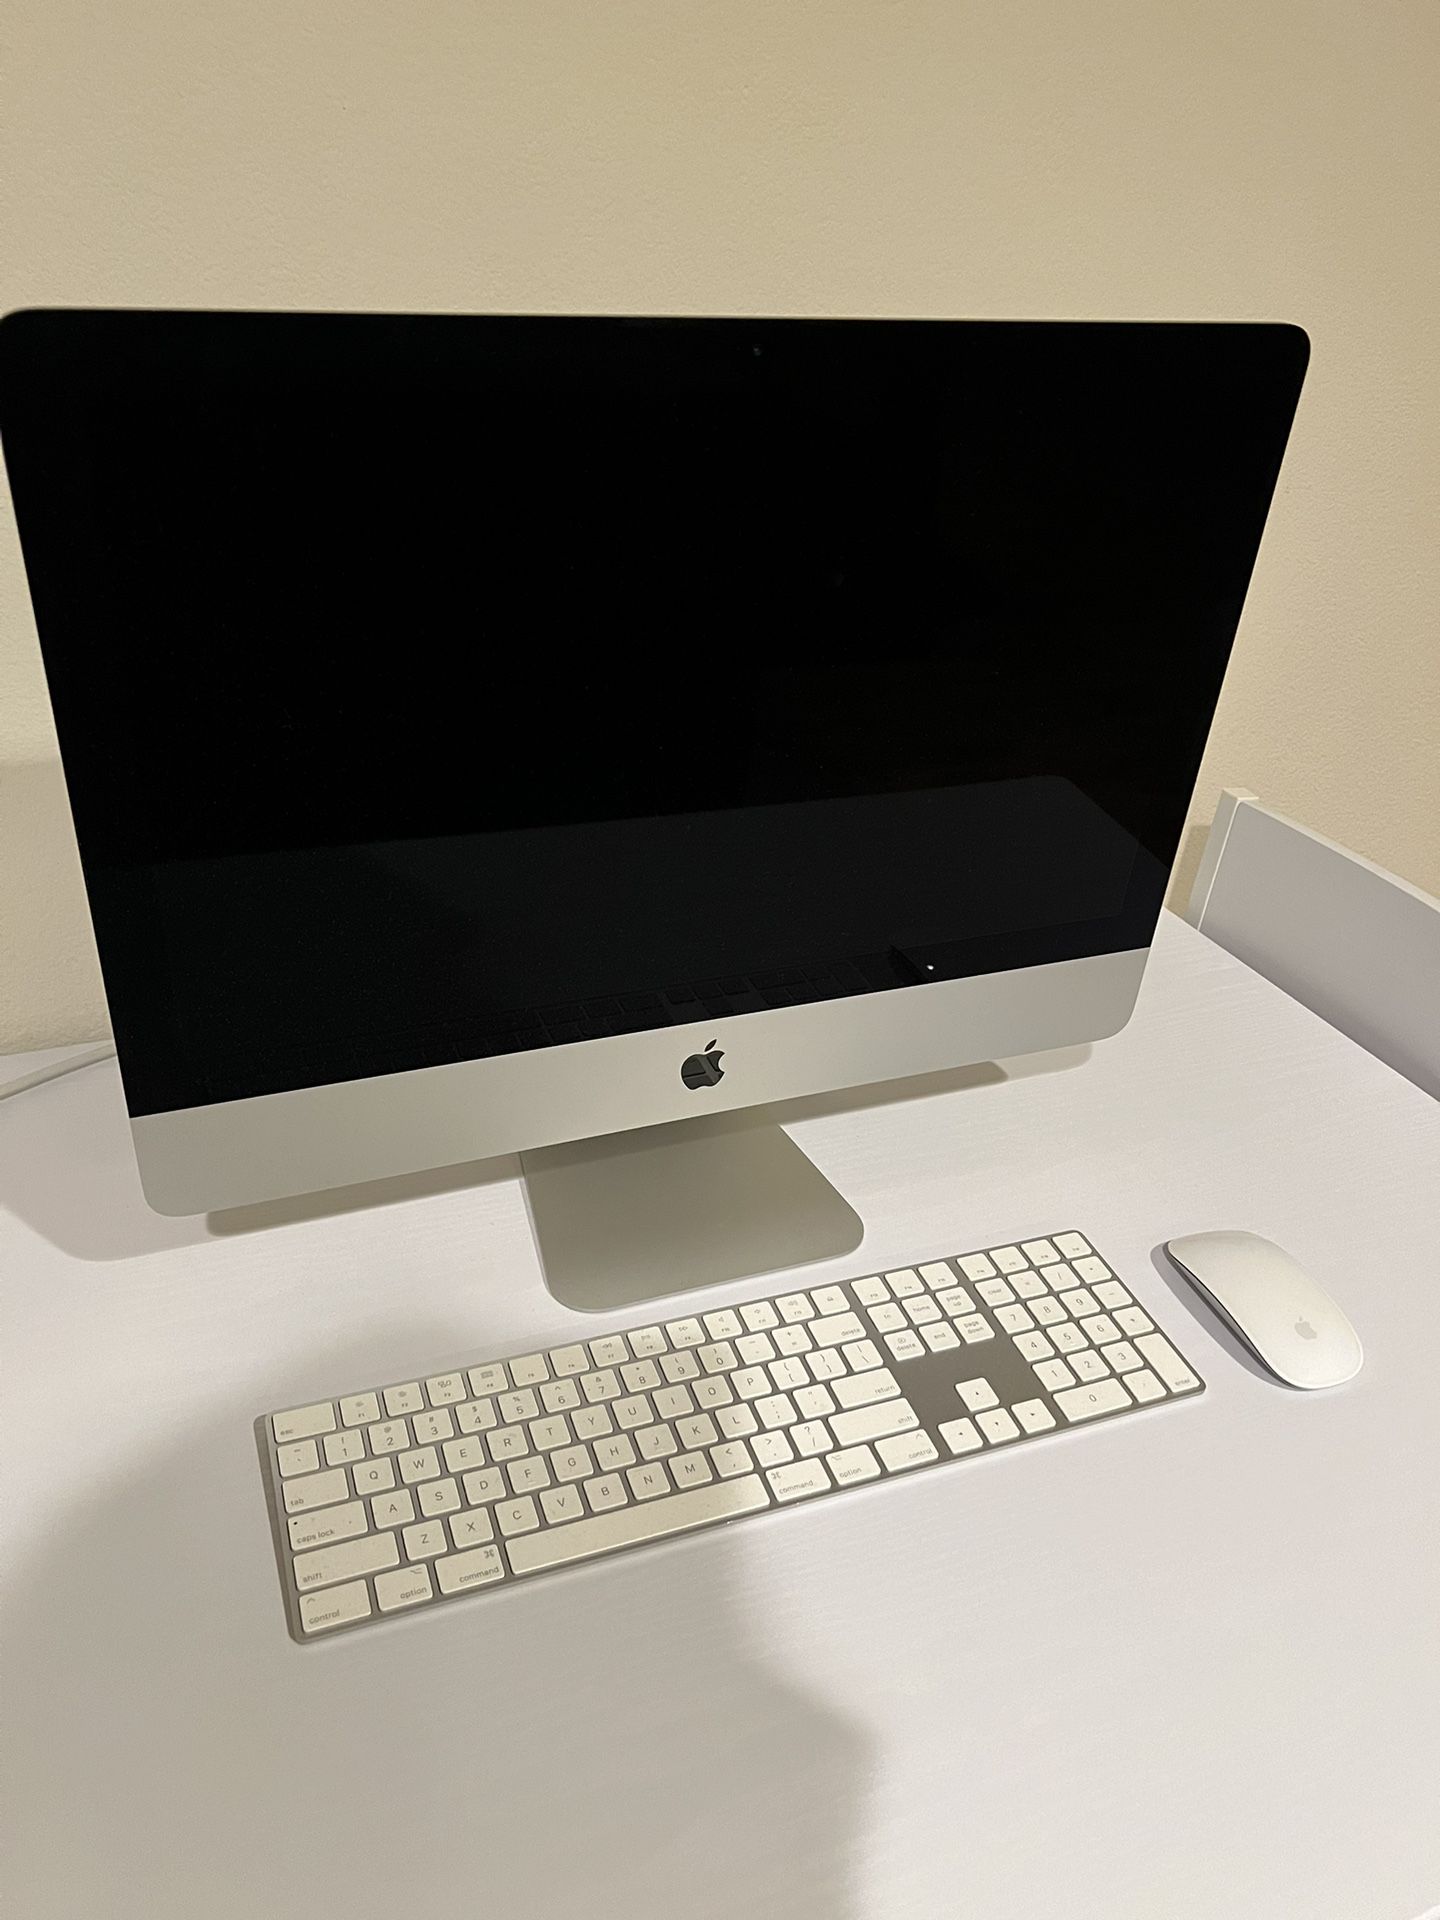 iMac 21.5-inch With Wireless Keyboard&Mouse